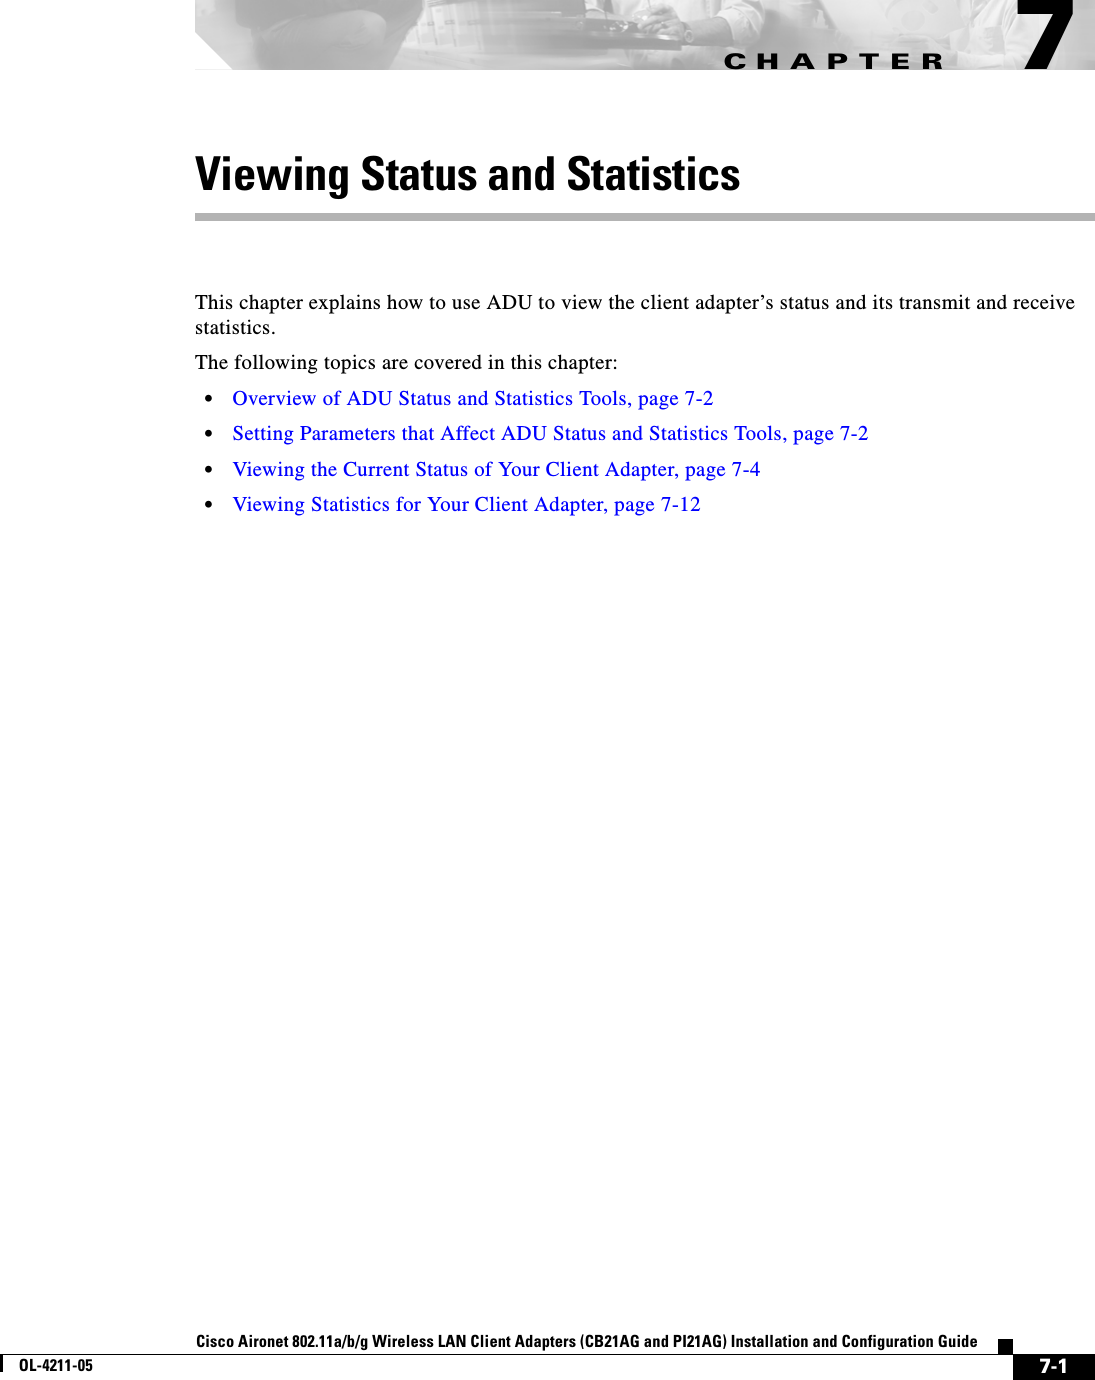 CHAPTER7-1Cisco Aironet 802.11a/b/g Wireless LAN Client Adapters (CB21AG and PI21AG) Installation and Configuration GuideOL-4211-057Viewing Status and StatisticsThis chapter explains how to use ADU to view the client adapter’s status and its transmit and receive statistics.The following topics are covered in this chapter:•Overview of ADU Status and Statistics Tools, page 7-2•Setting Parameters that Affect ADU Status and Statistics Tools, page 7-2•Viewing the Current Status of Your Client Adapter, page 7-4•Viewing Statistics for Your Client Adapter, page 7-12